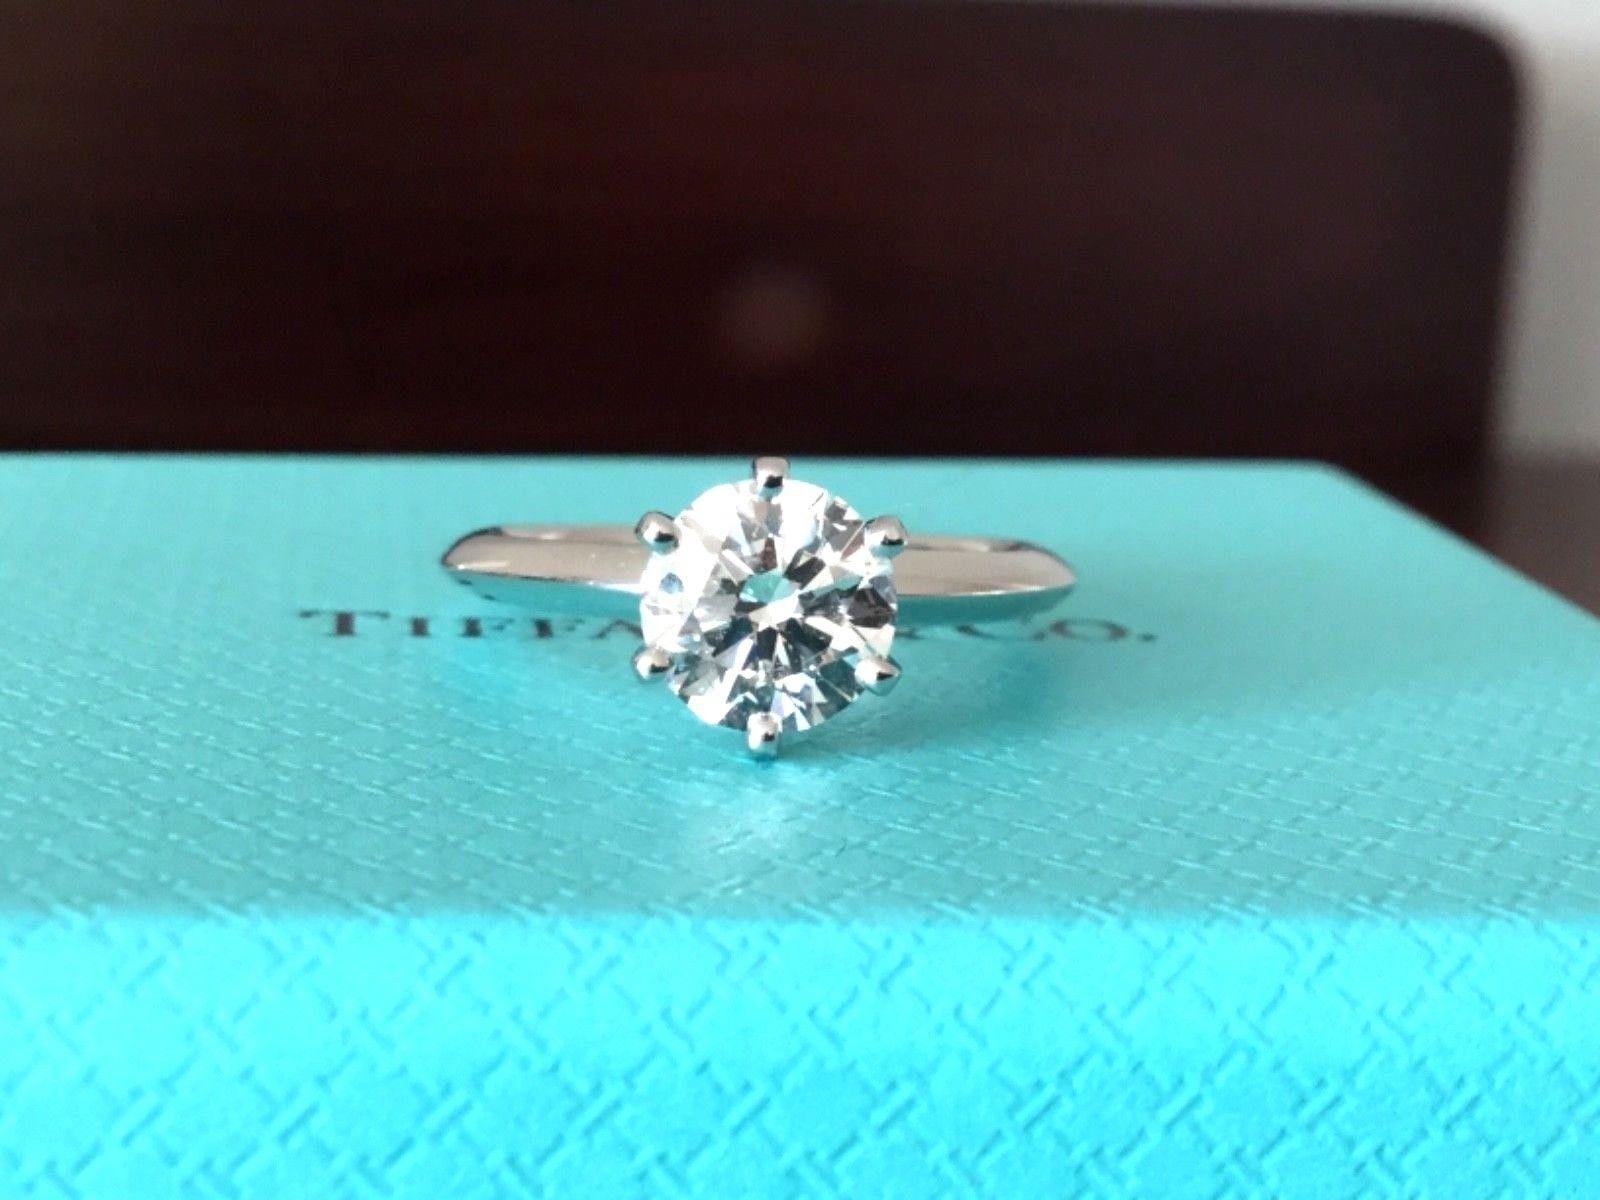 Being offered for your consideration is a 2018 model Tiffany & Co Platinum and Diamond 1.00 carat natural round engagement ring set in the classic 6 prong setting.  The ring is basically brand new due to a 3 week engagement.  The ring shows like